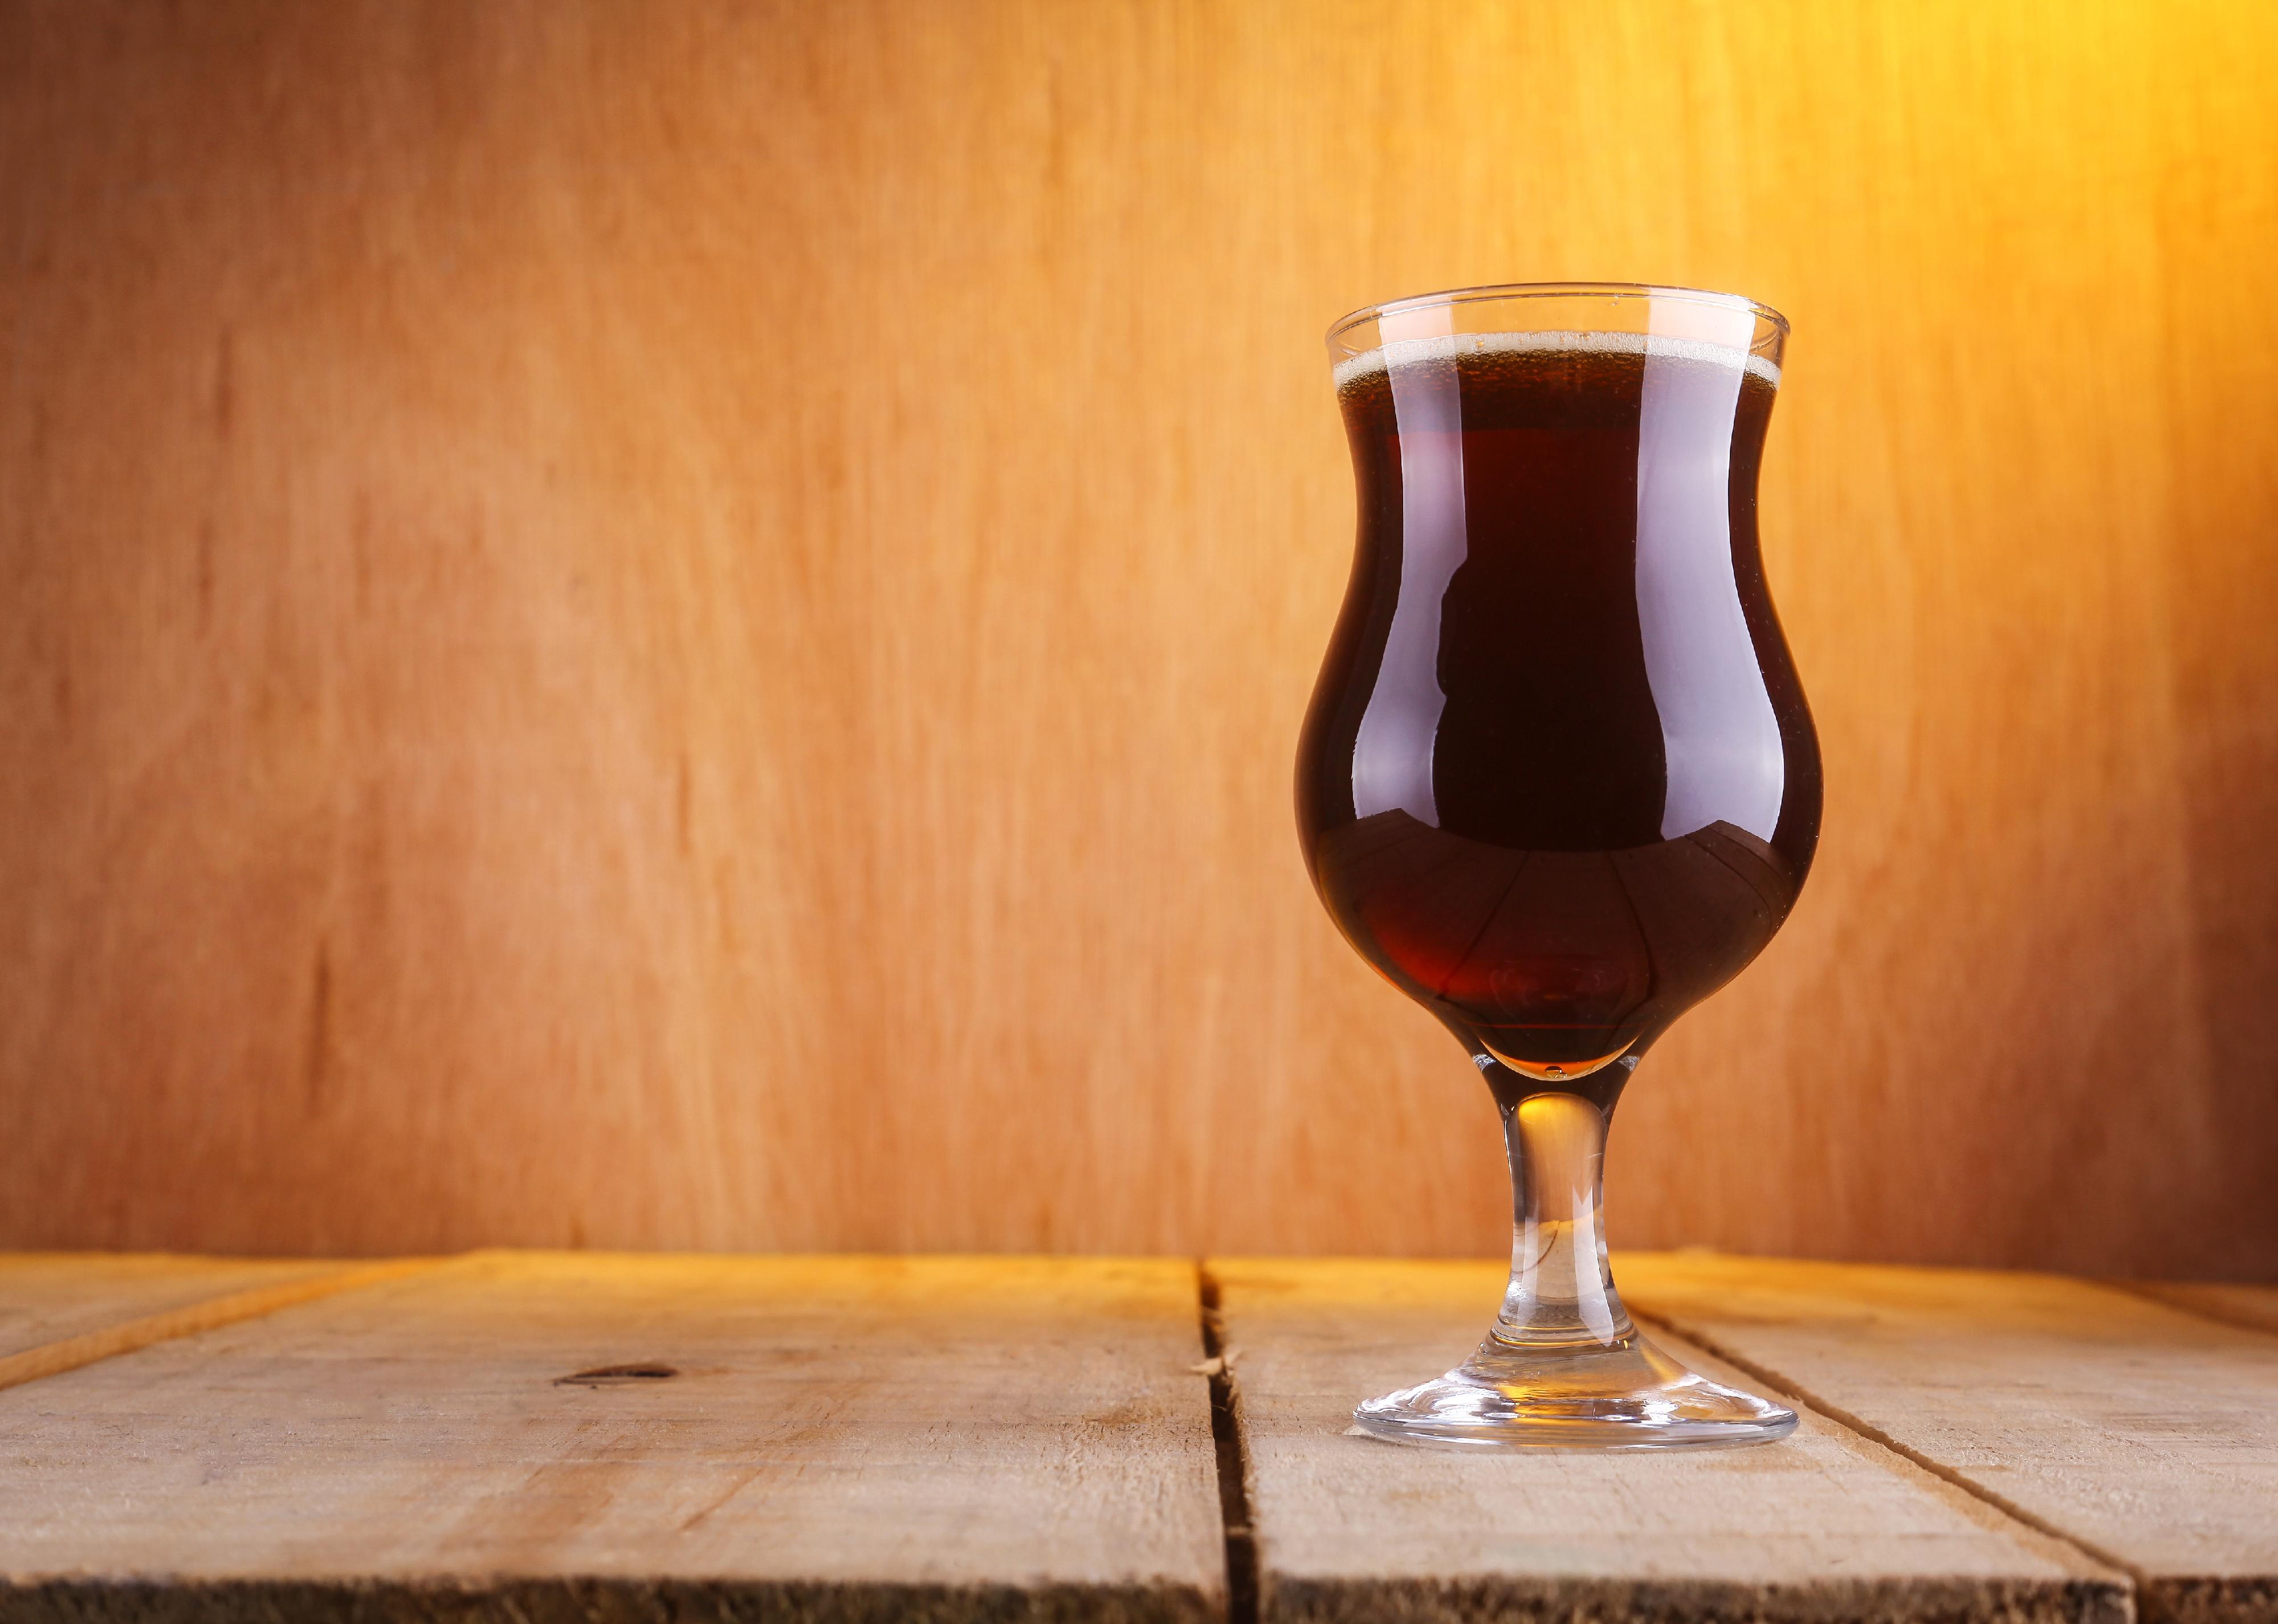 Tulip glass with dark brown beer on a grunge wood surface